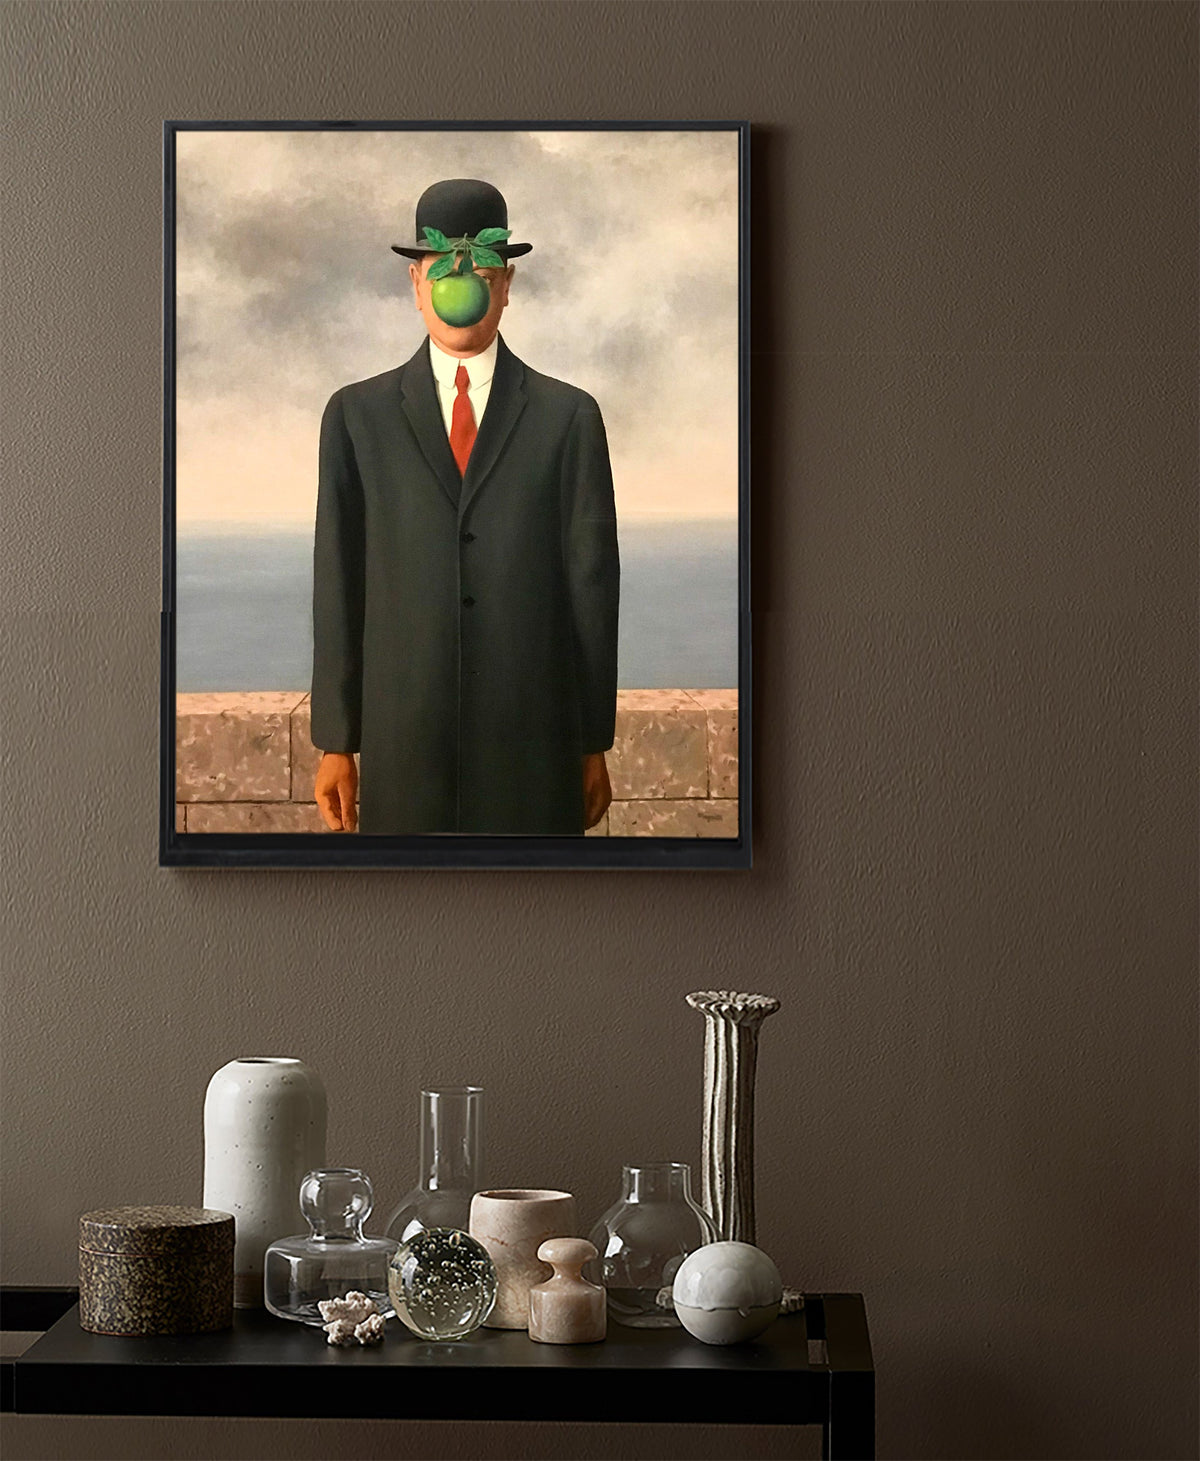 rene magritte the son of man